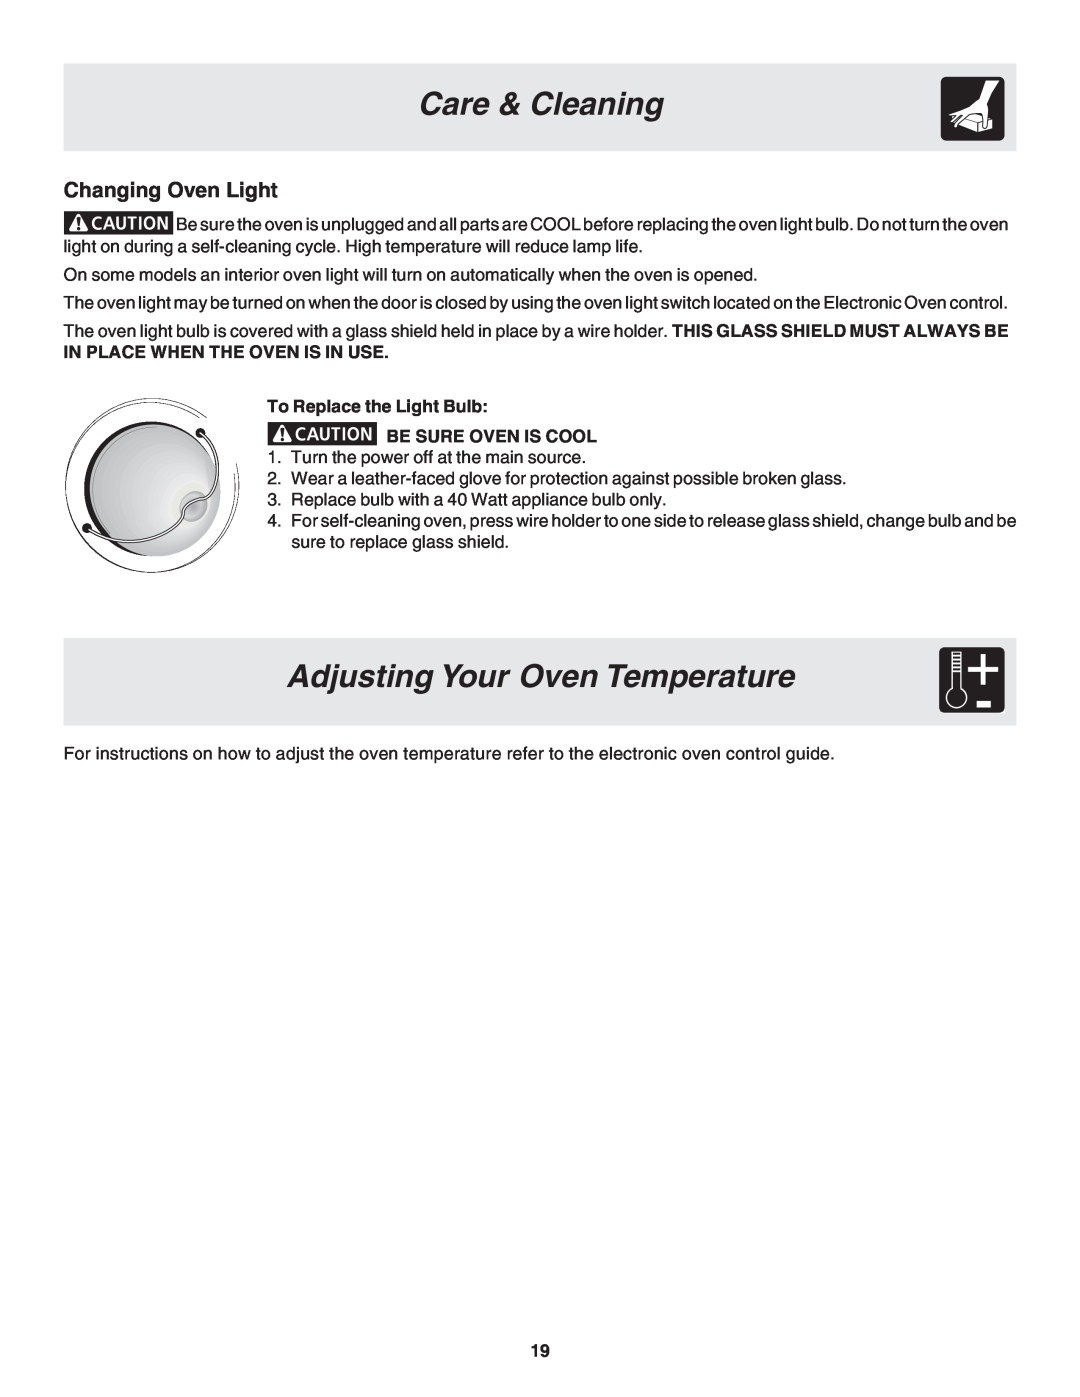 Frigidaire 318203858 warranty Adjusting Your Oven Temperature, Care & Cleaning, Changing Oven Light, Be Sure Oven Is Cool 